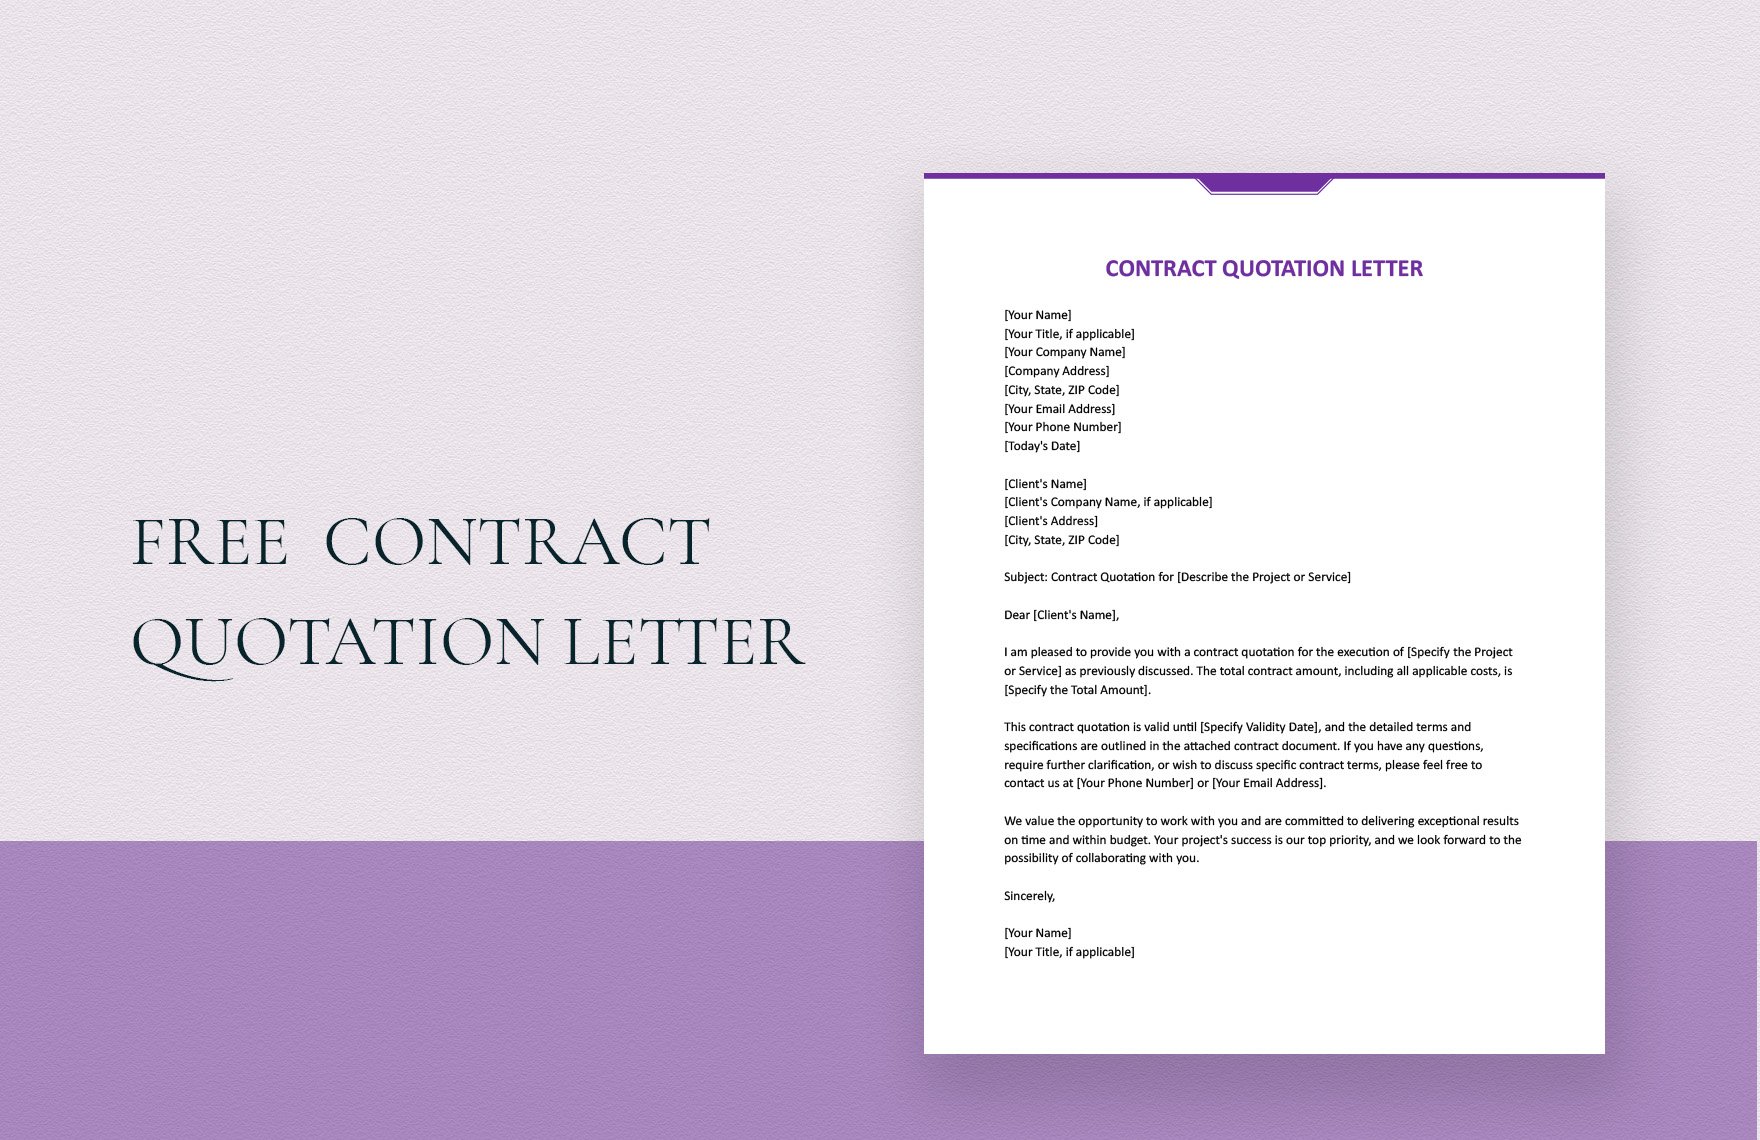 Contract Quotation Letter in Word, Google Docs